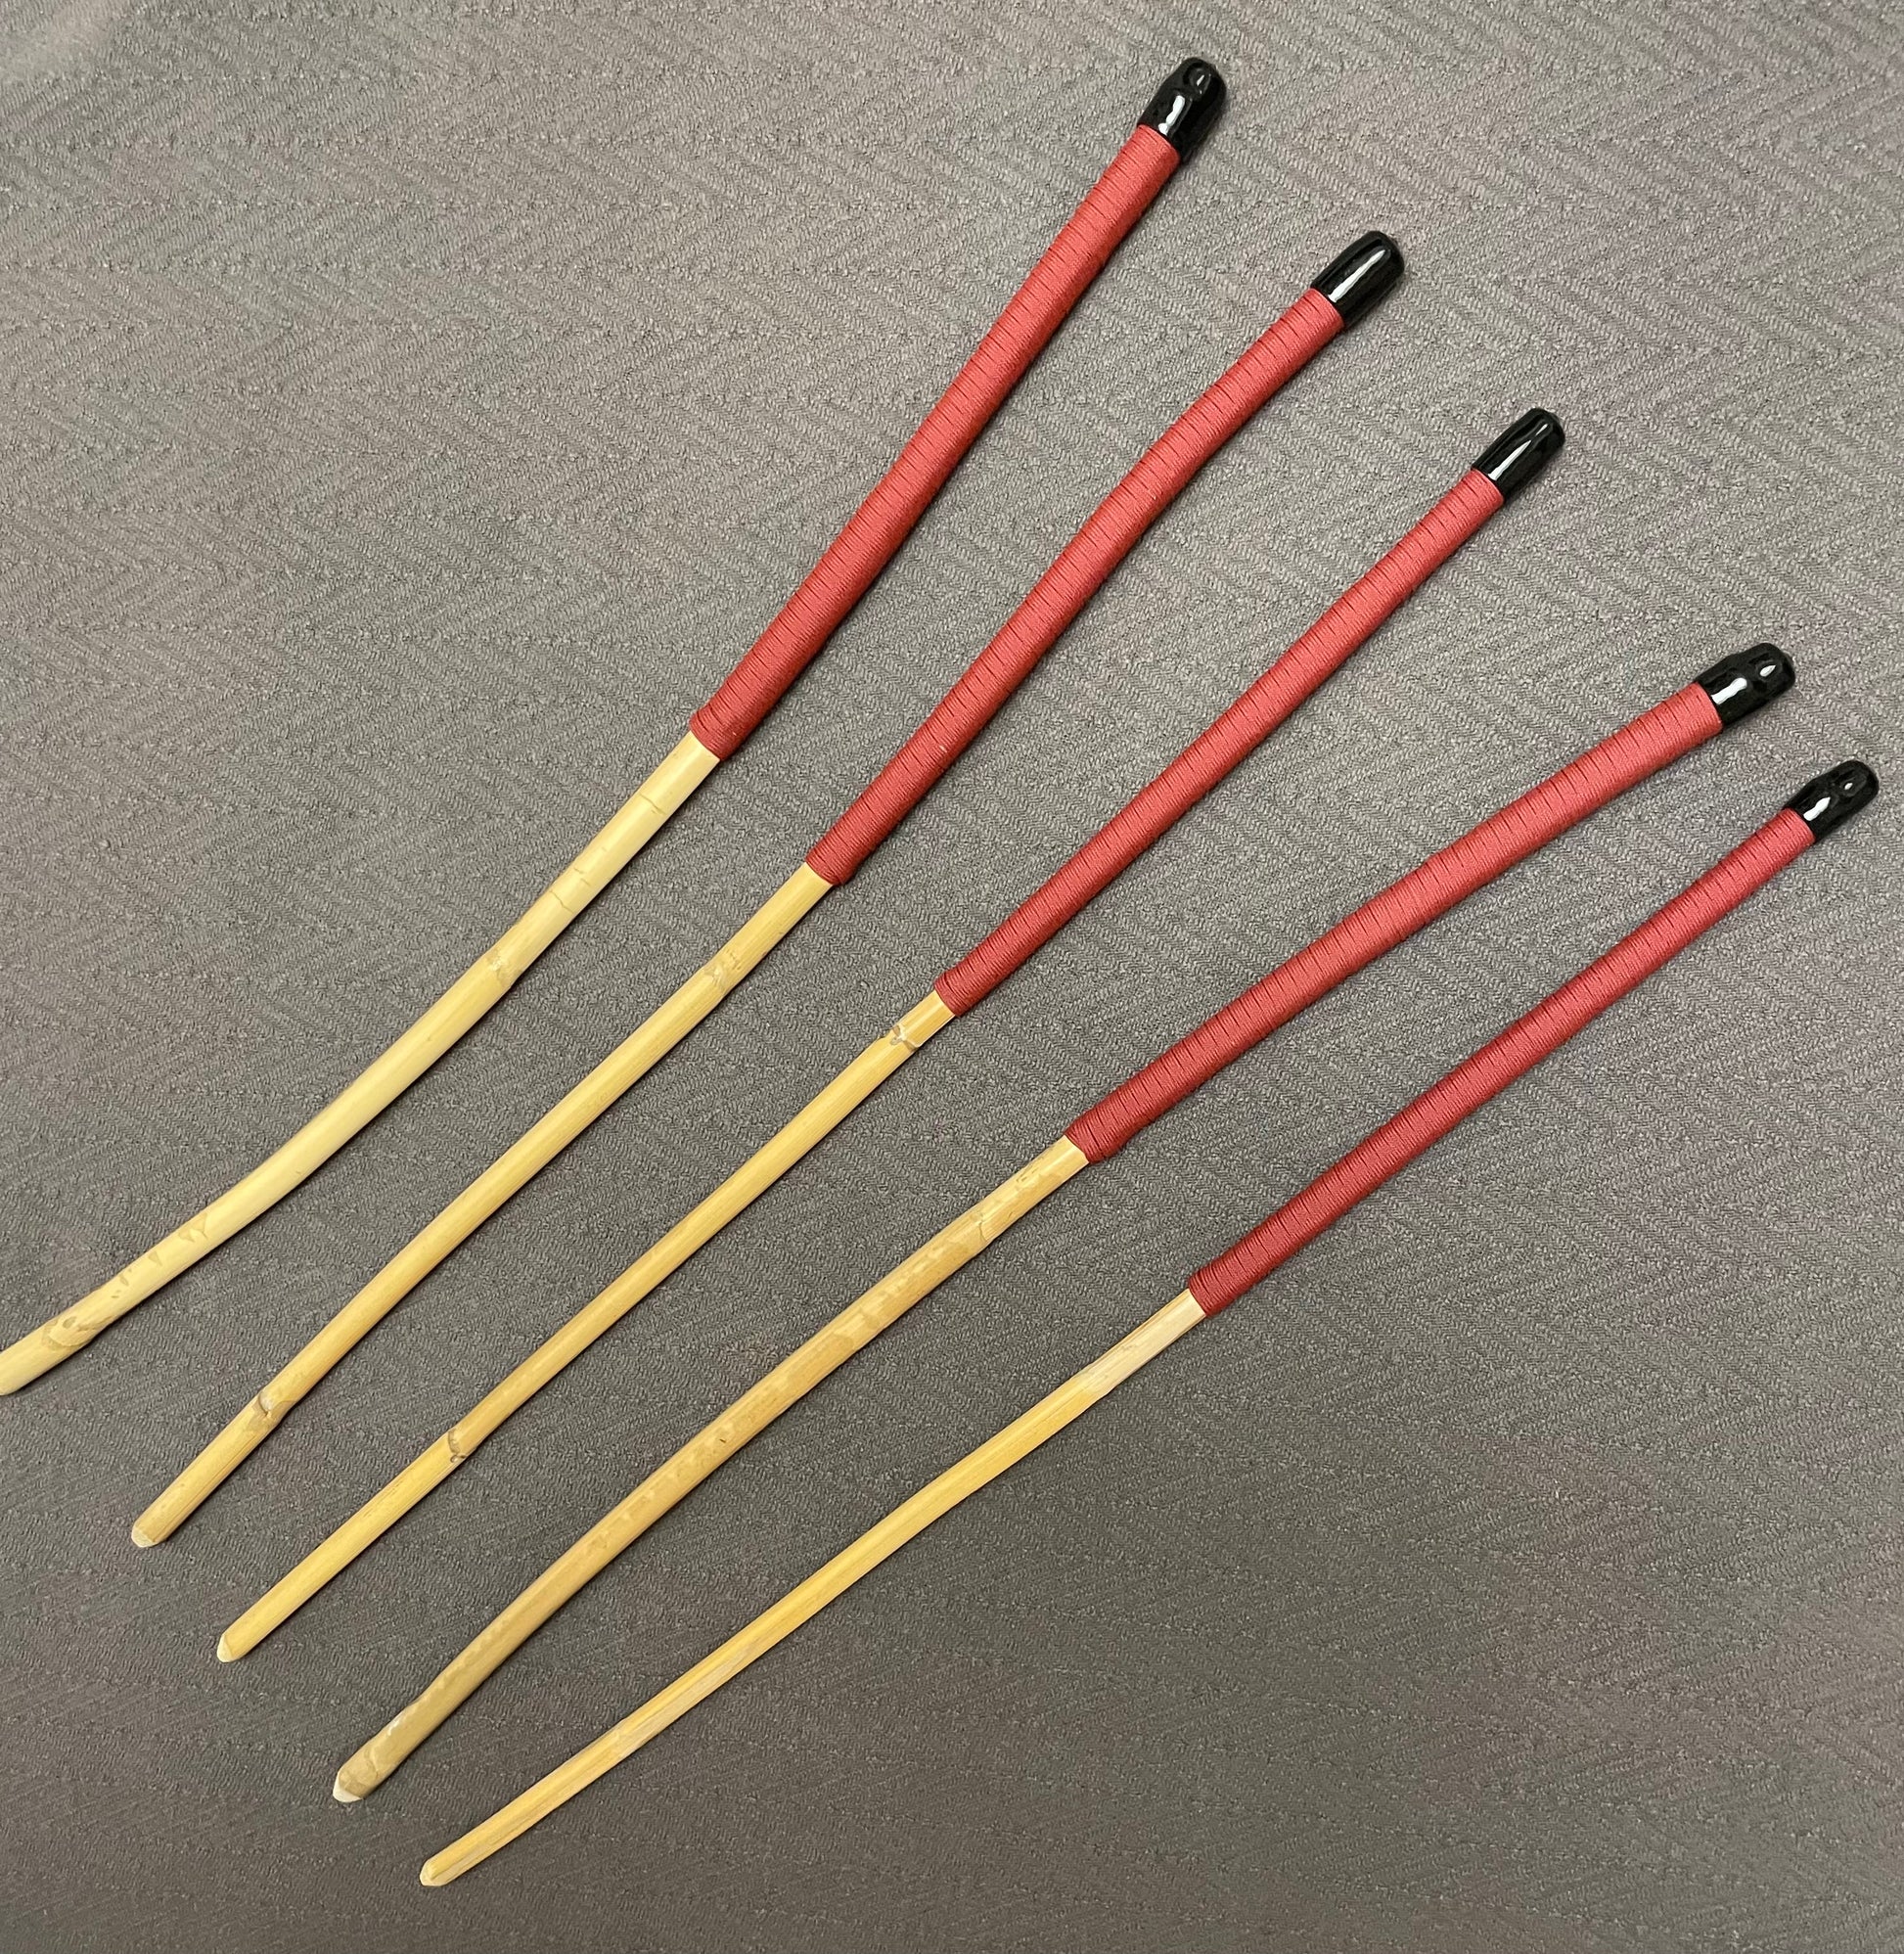 Set of 5 Classic Kooboo Rattan OTK Punishment canes with RED Paracord Handles - Over the Knee OTK Cane Set